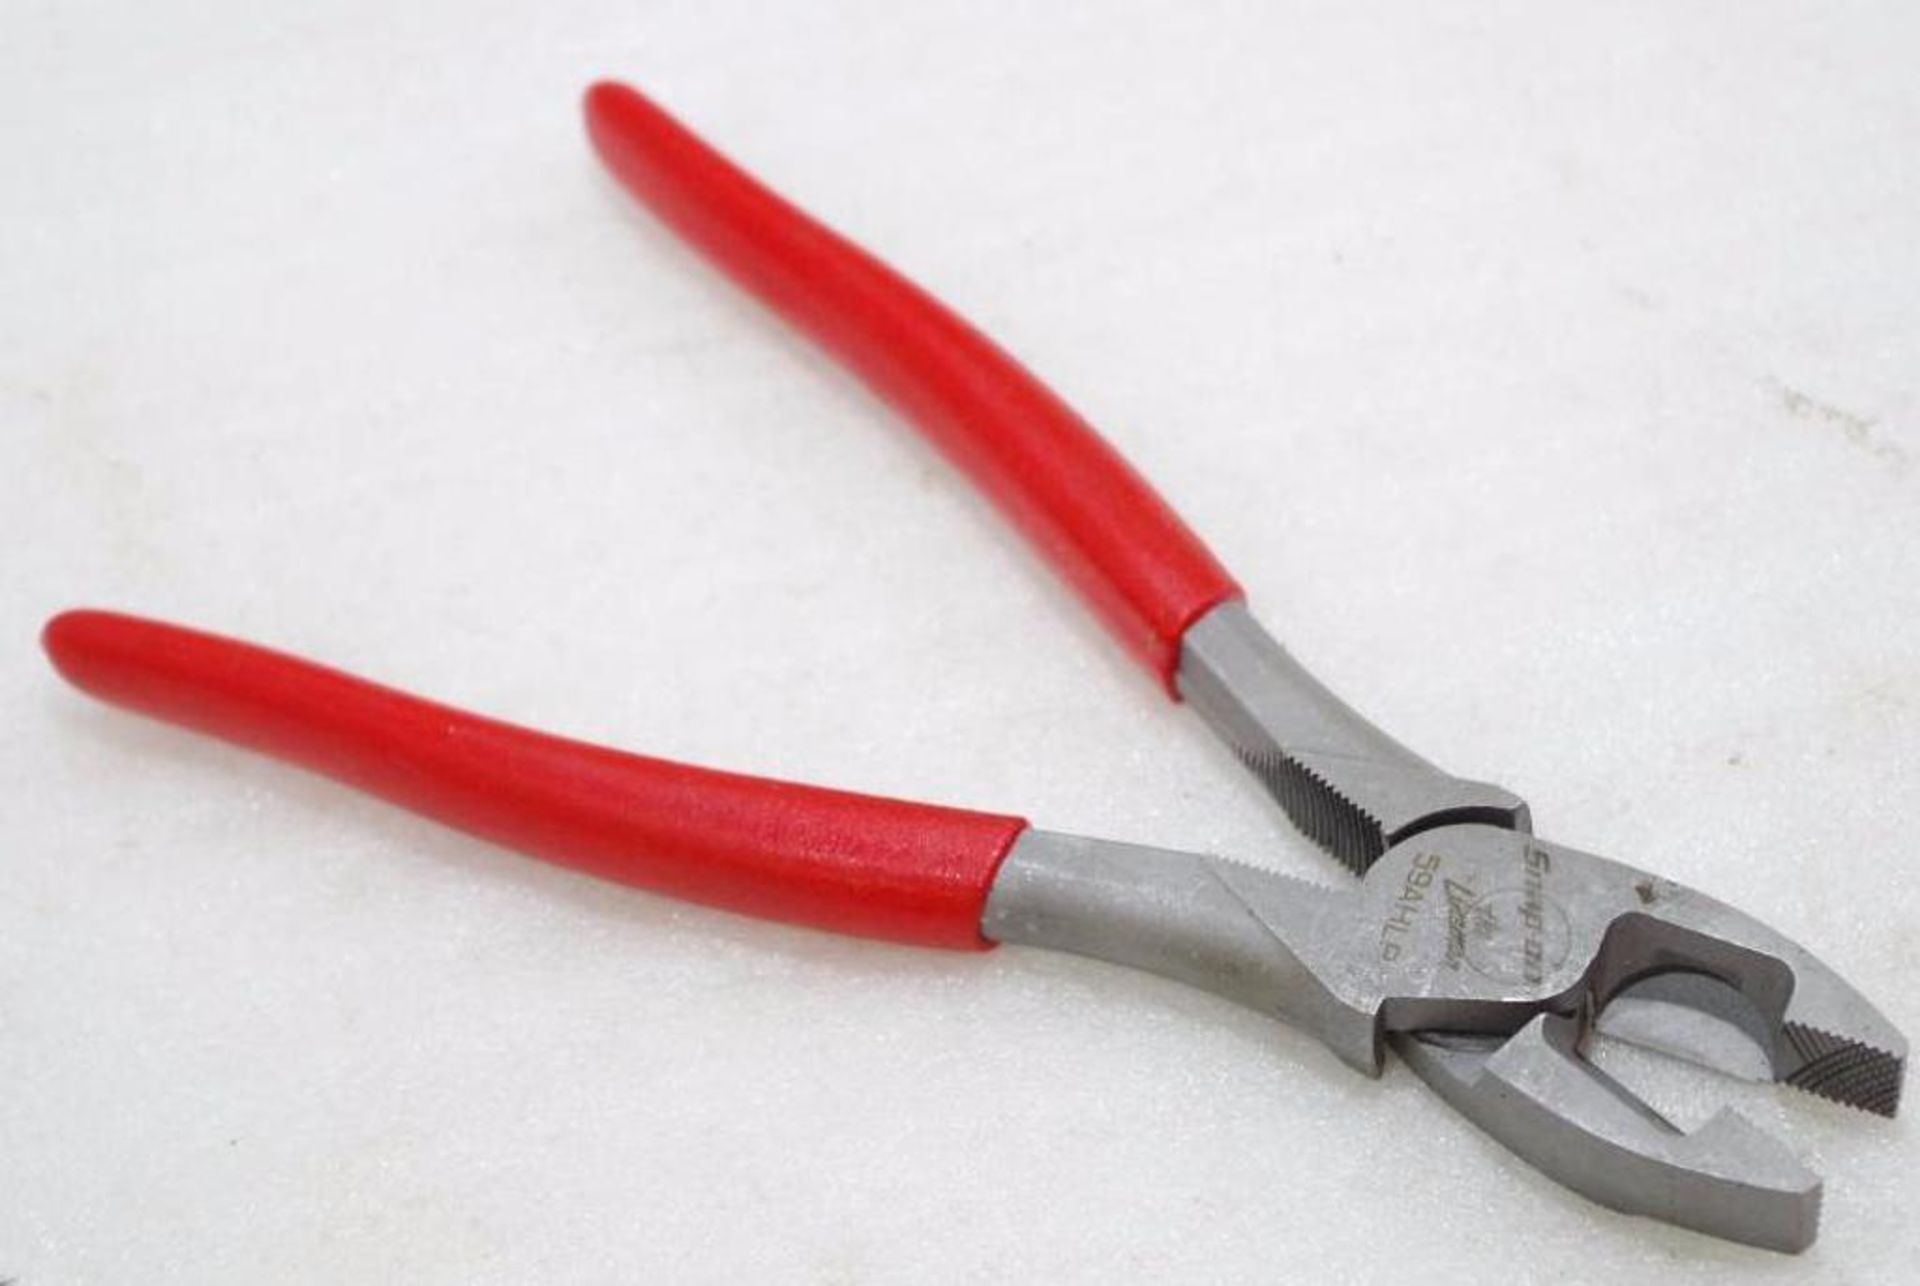 NEW SNAP-ON Lineman's Pliers, M/N 59AHLP, Made in USA - Image 5 of 5